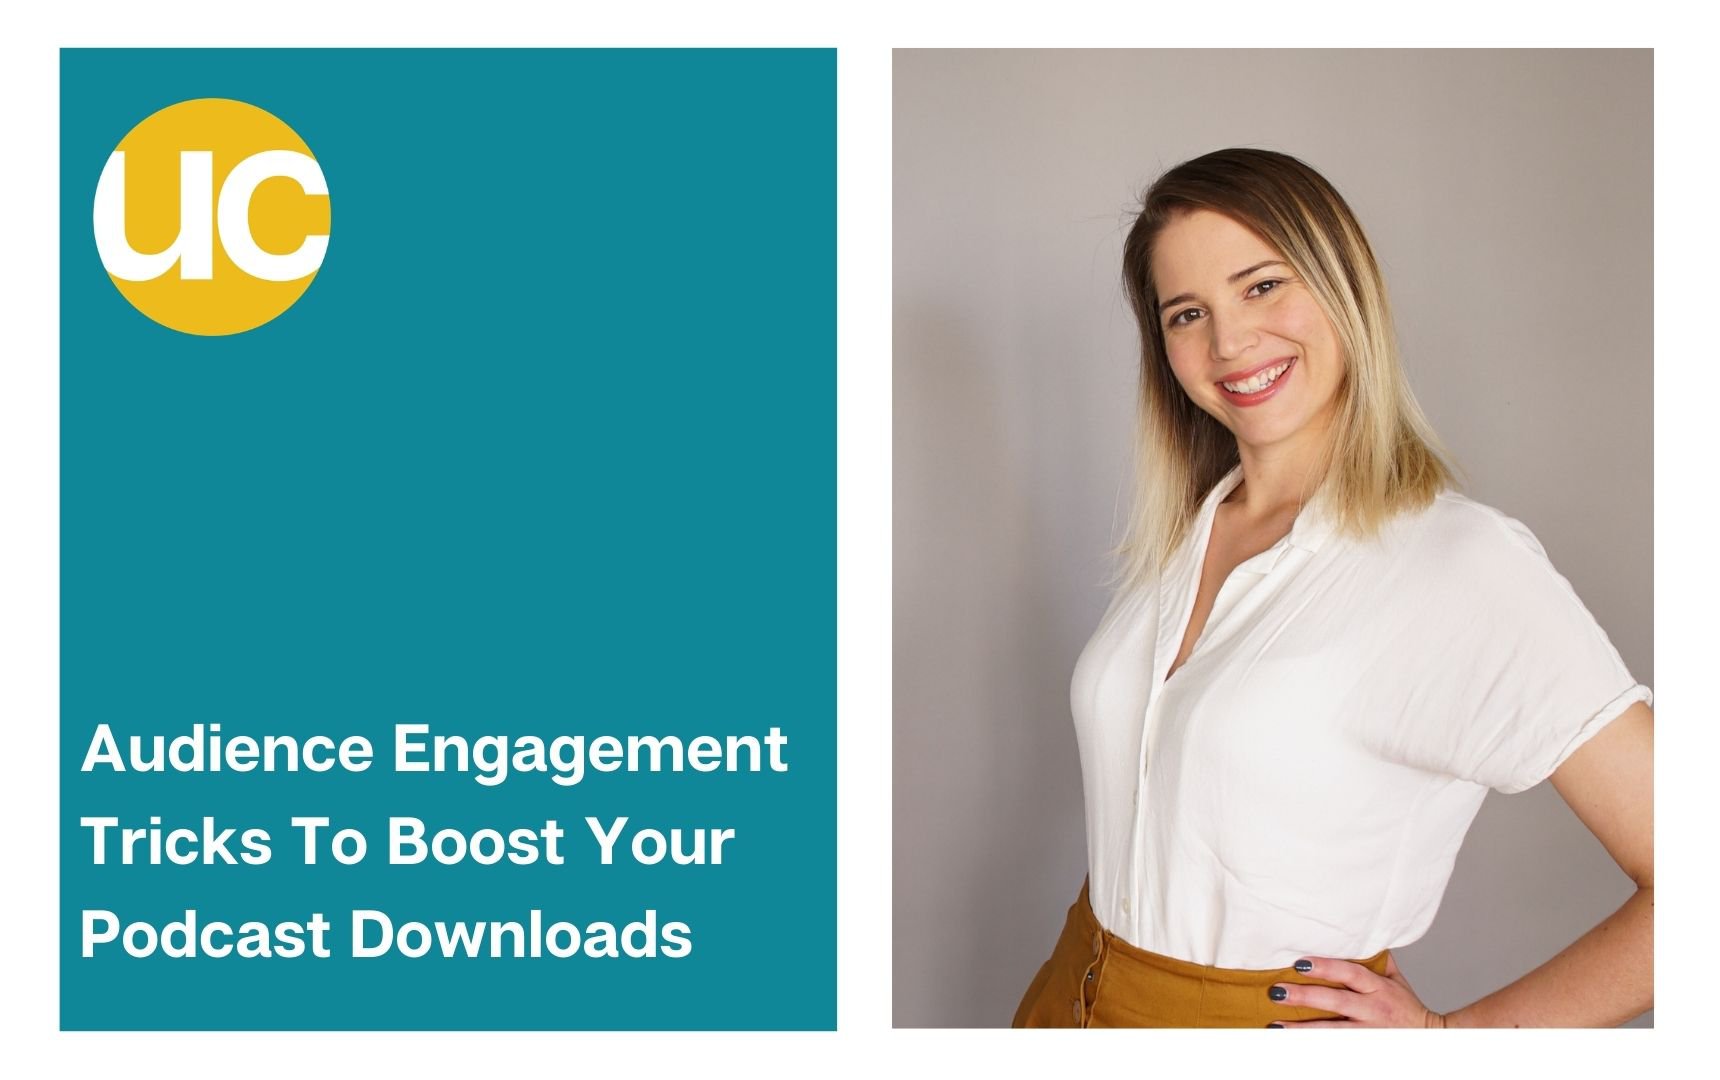 Audience Engagement Tricks To Boost Your Podcast Downloads